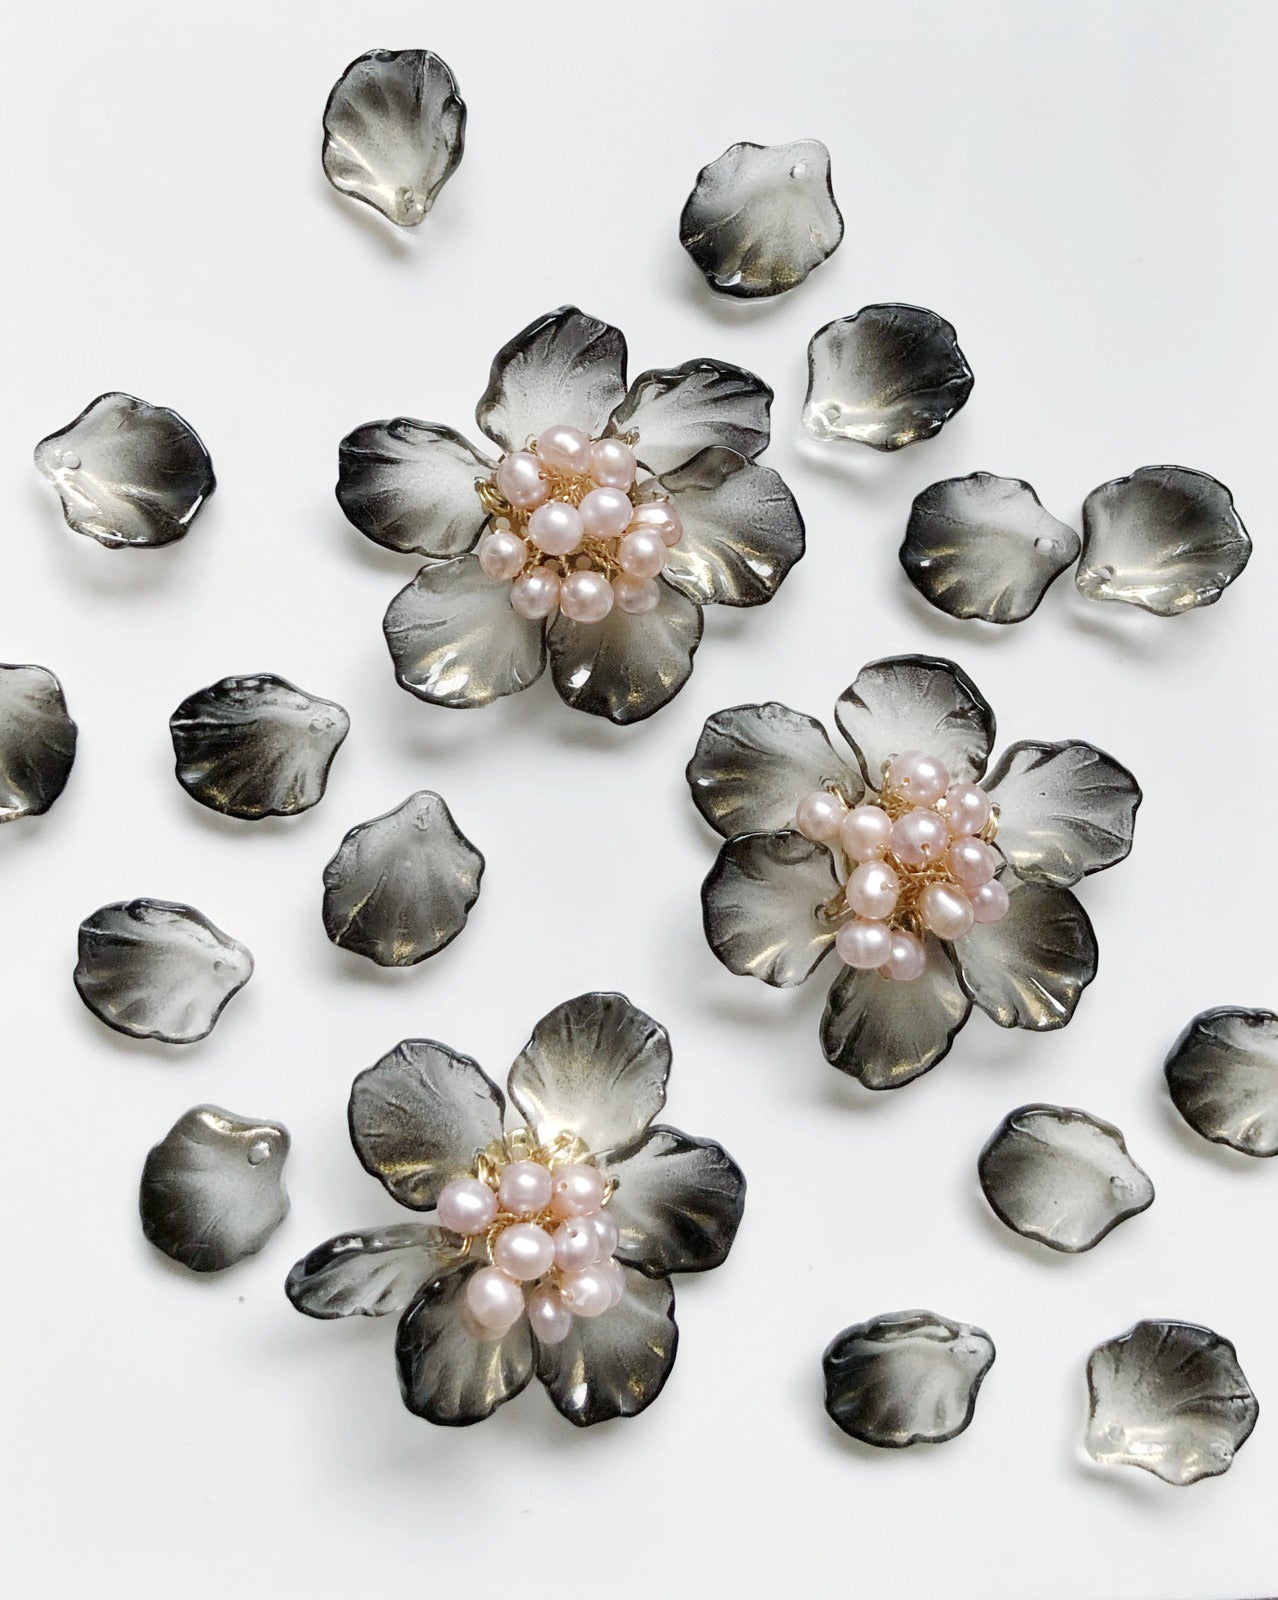 The Sisters glass and freshwater pearls floral brooch in black